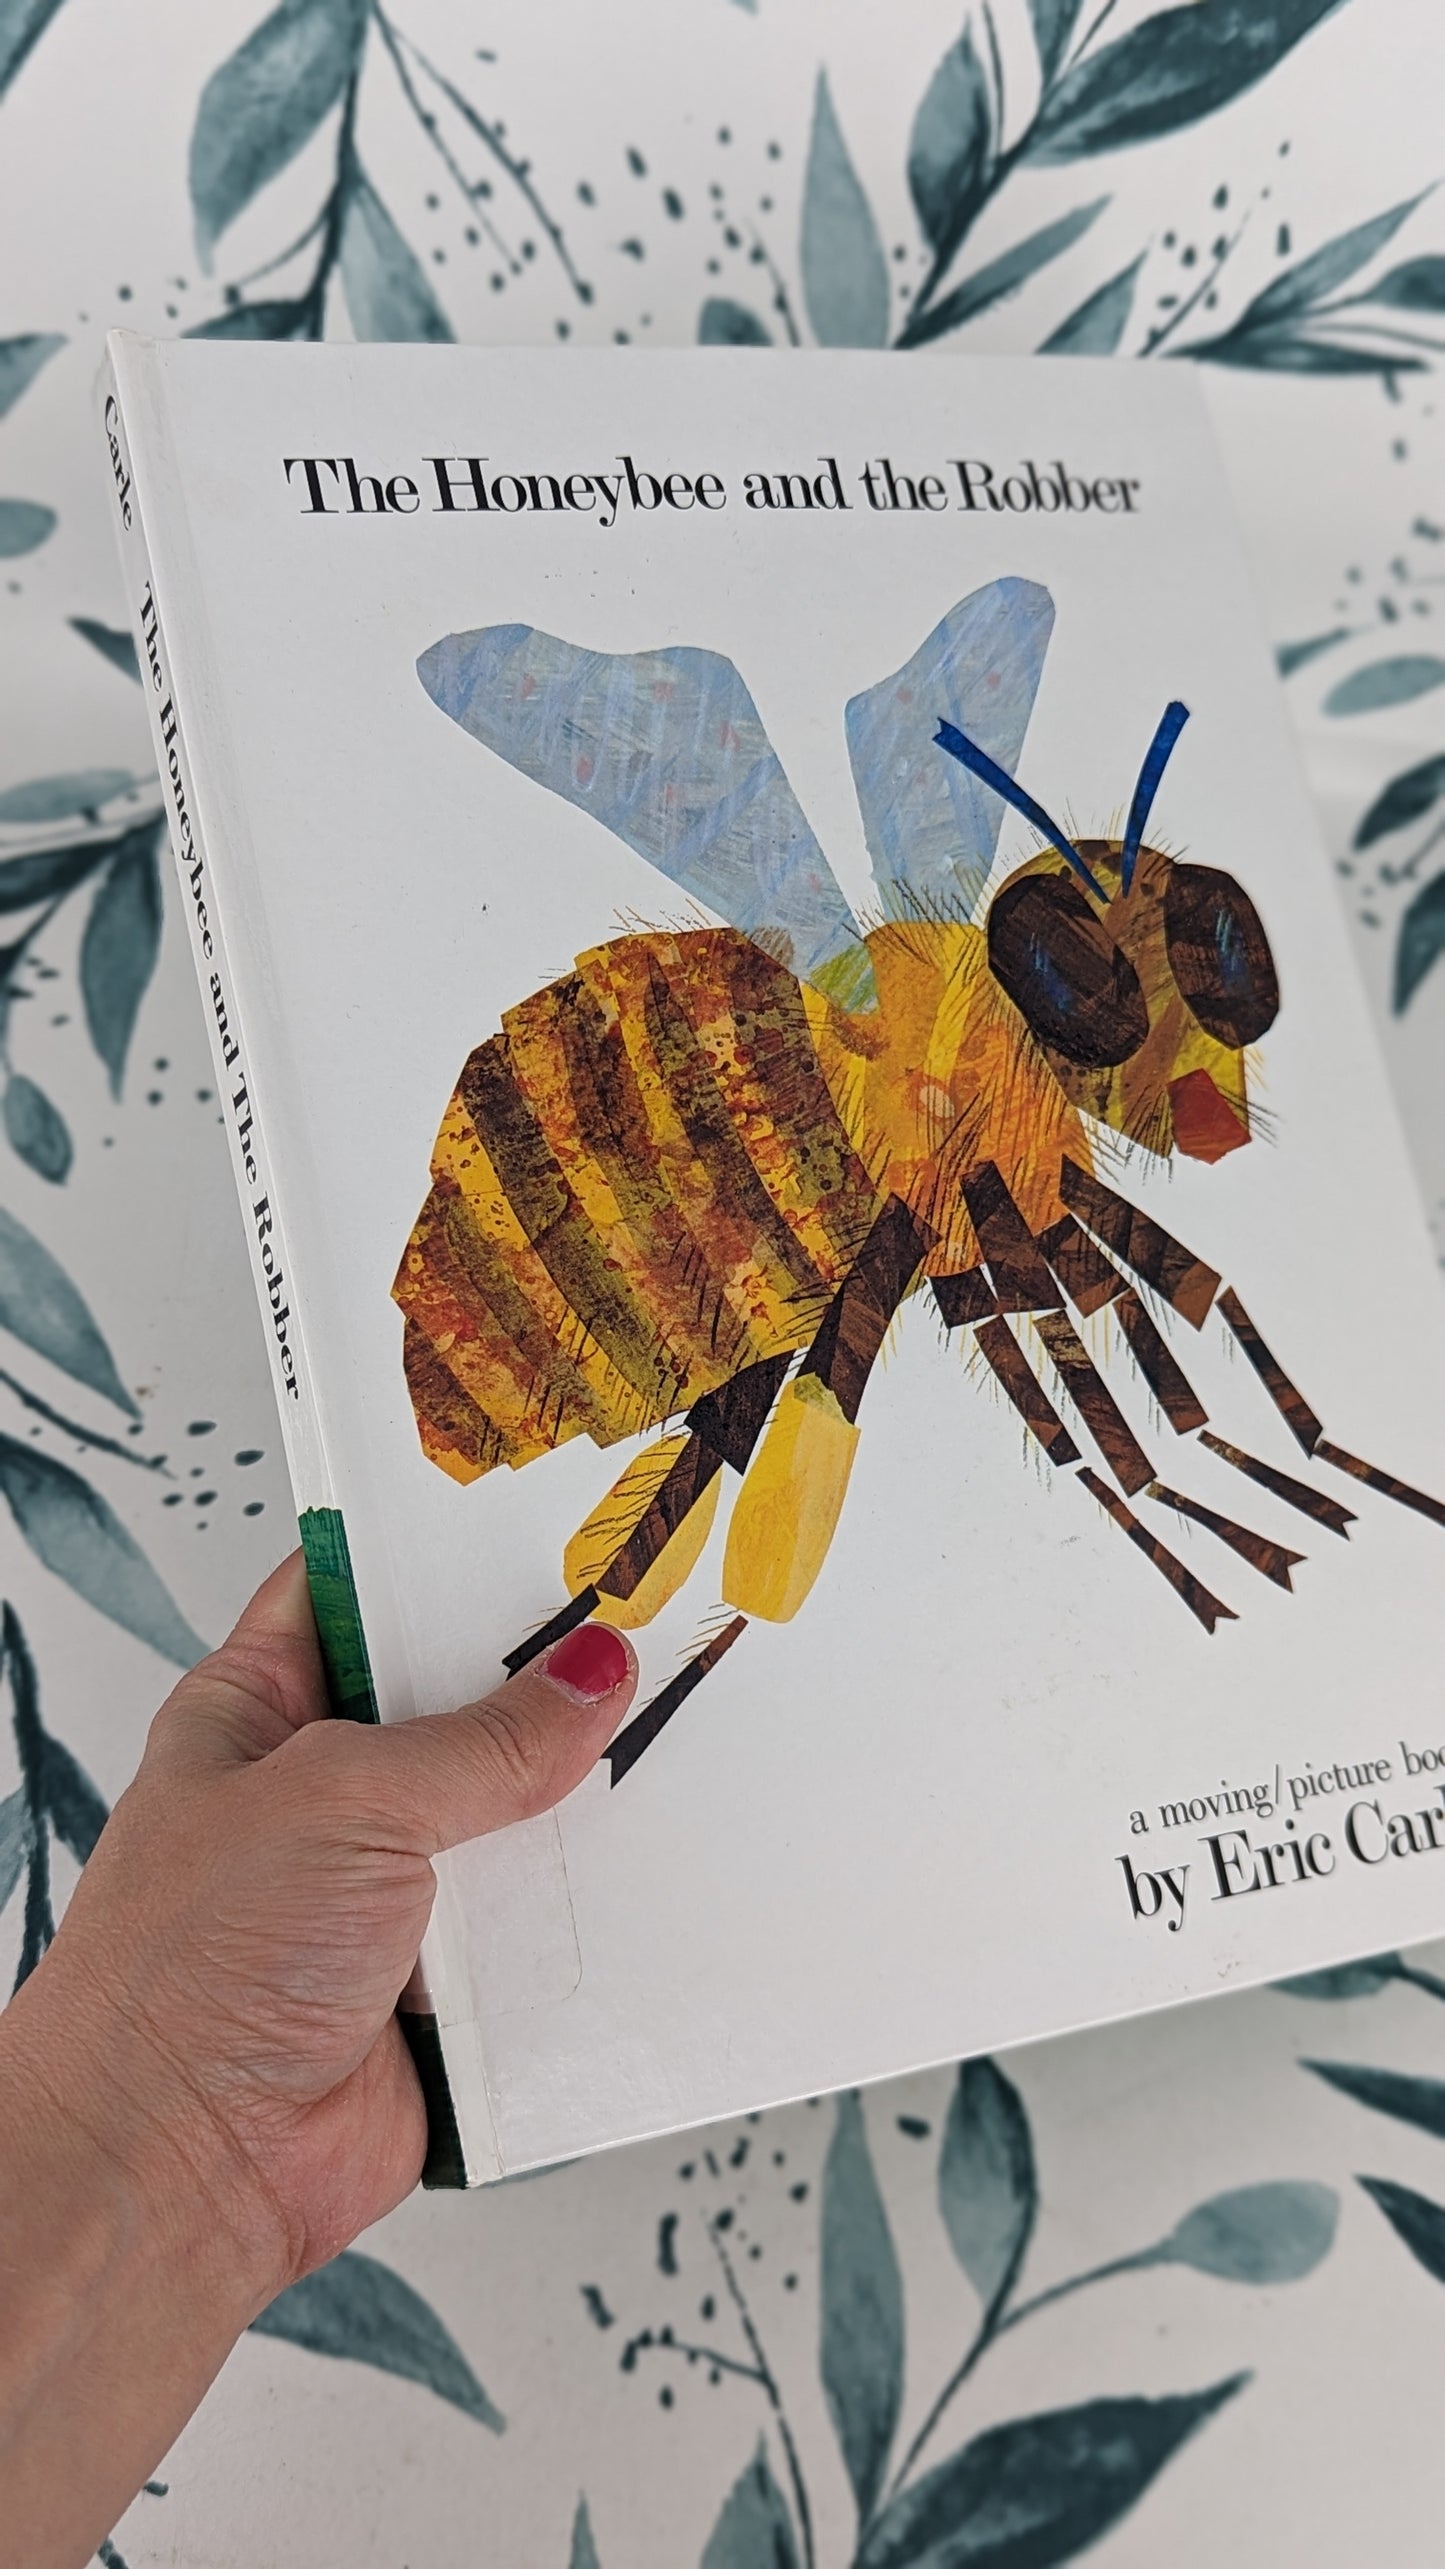 The Honeybee and the Robber (A Moving Book)